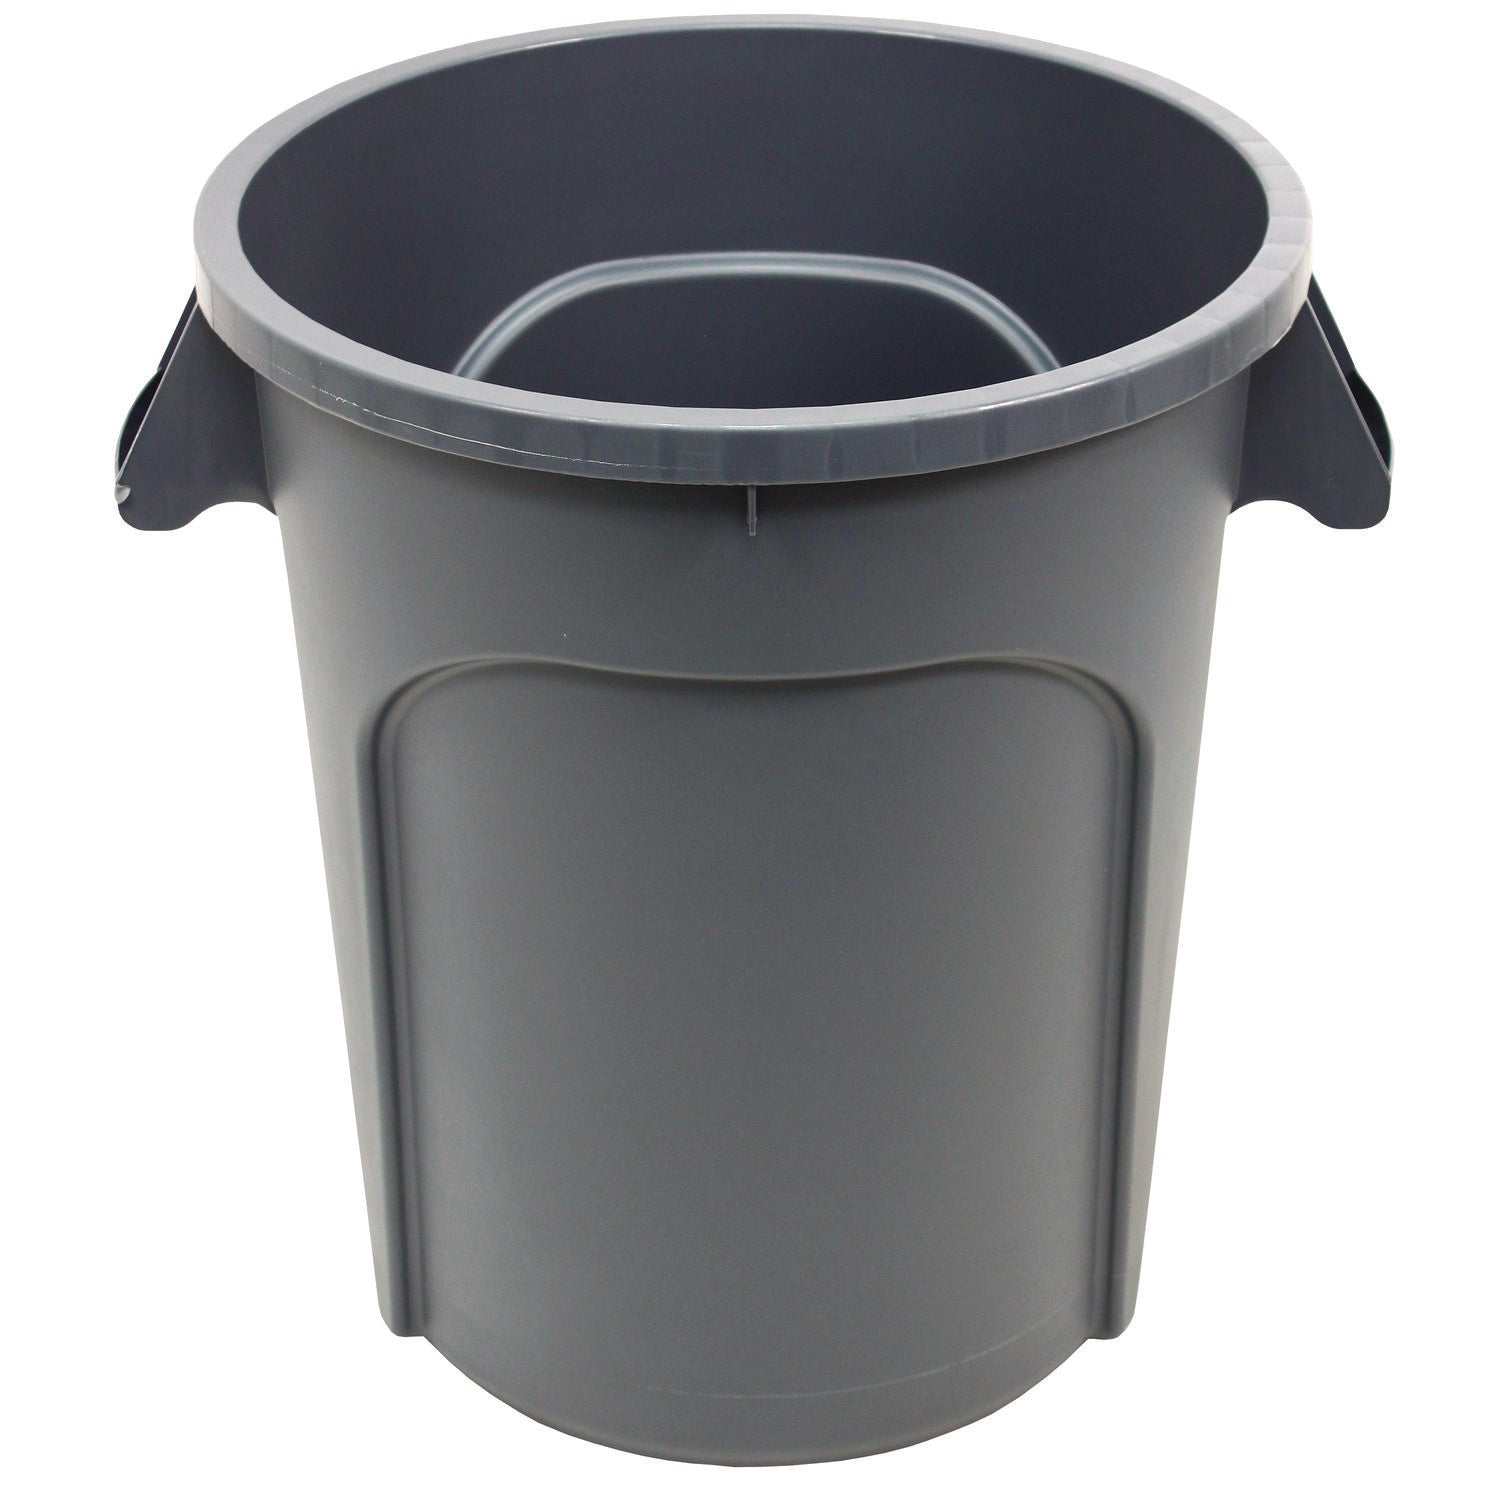 value-plus-containers-20-gal-low-density-polyethylene-gray_impgc200103 - 1